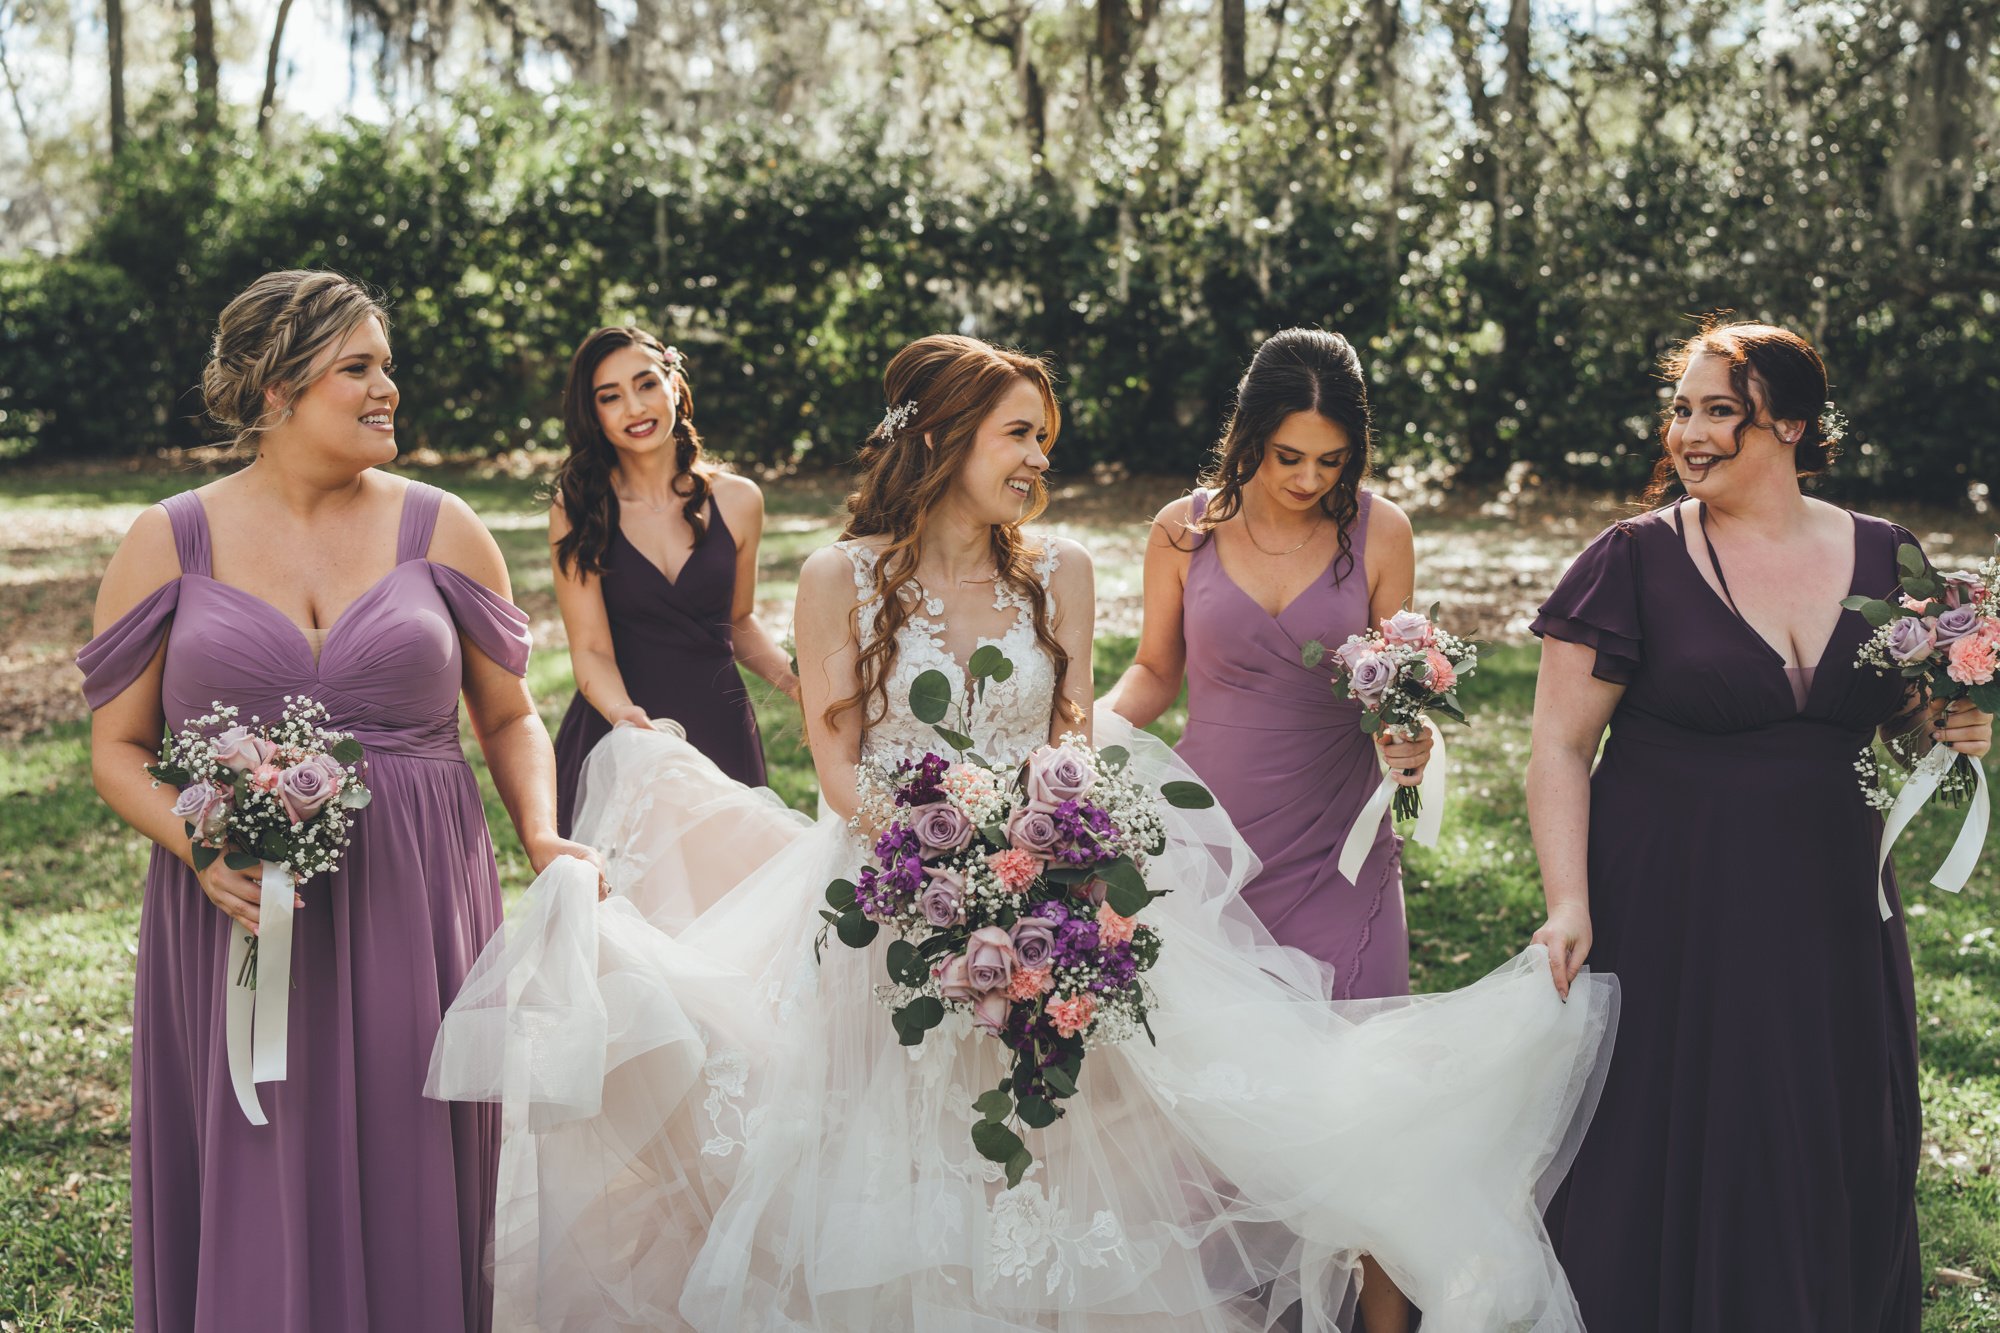 Southern Palms Studio bride walking with her bridesmaids at Bowing Oaks in Jacksonville, FL.jpg